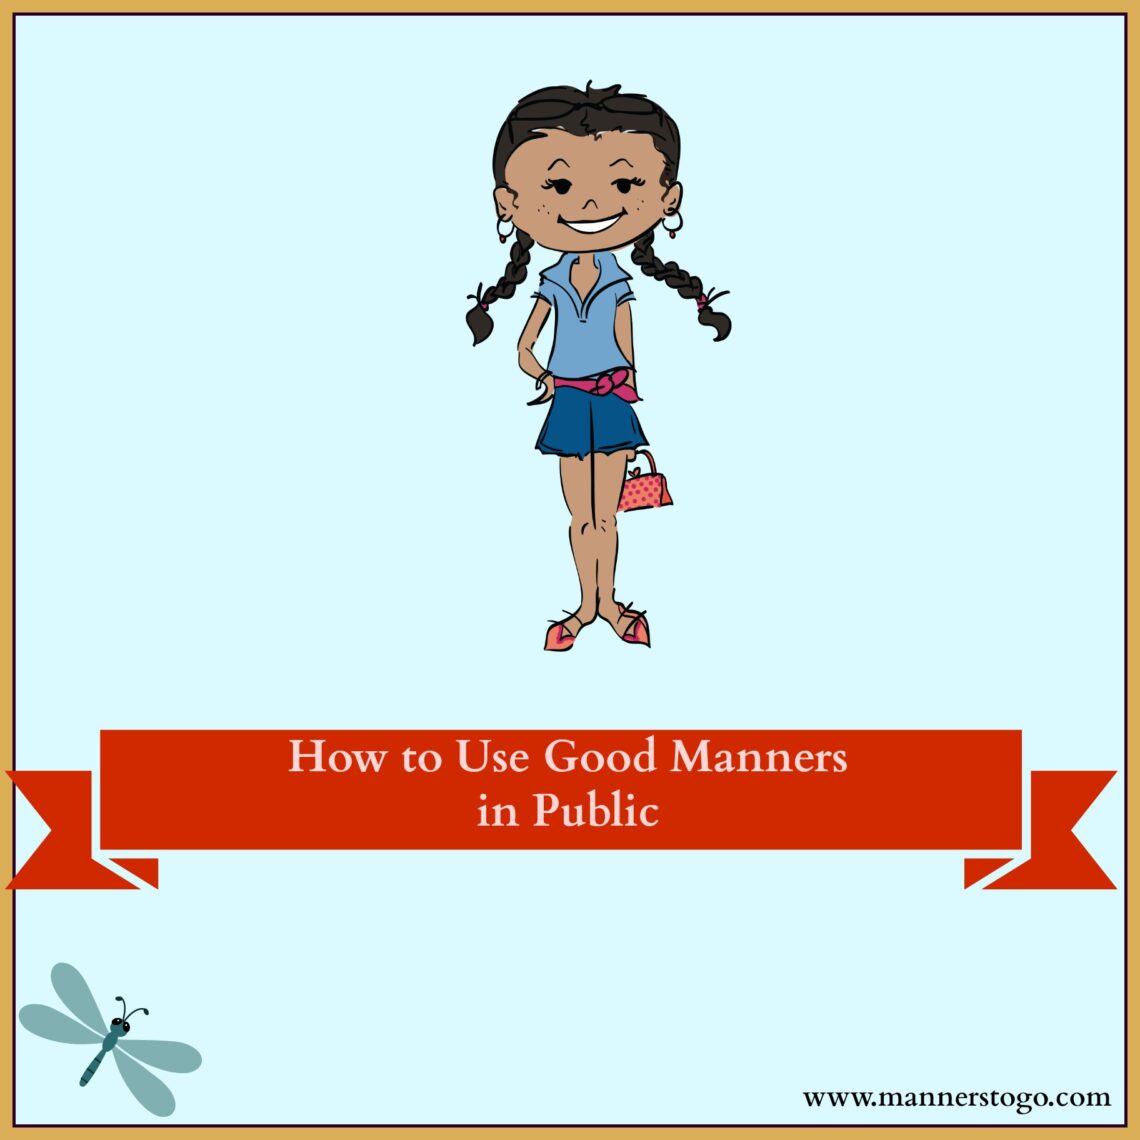 Teach Children to Use Good Manners in Public - Manners To Go™